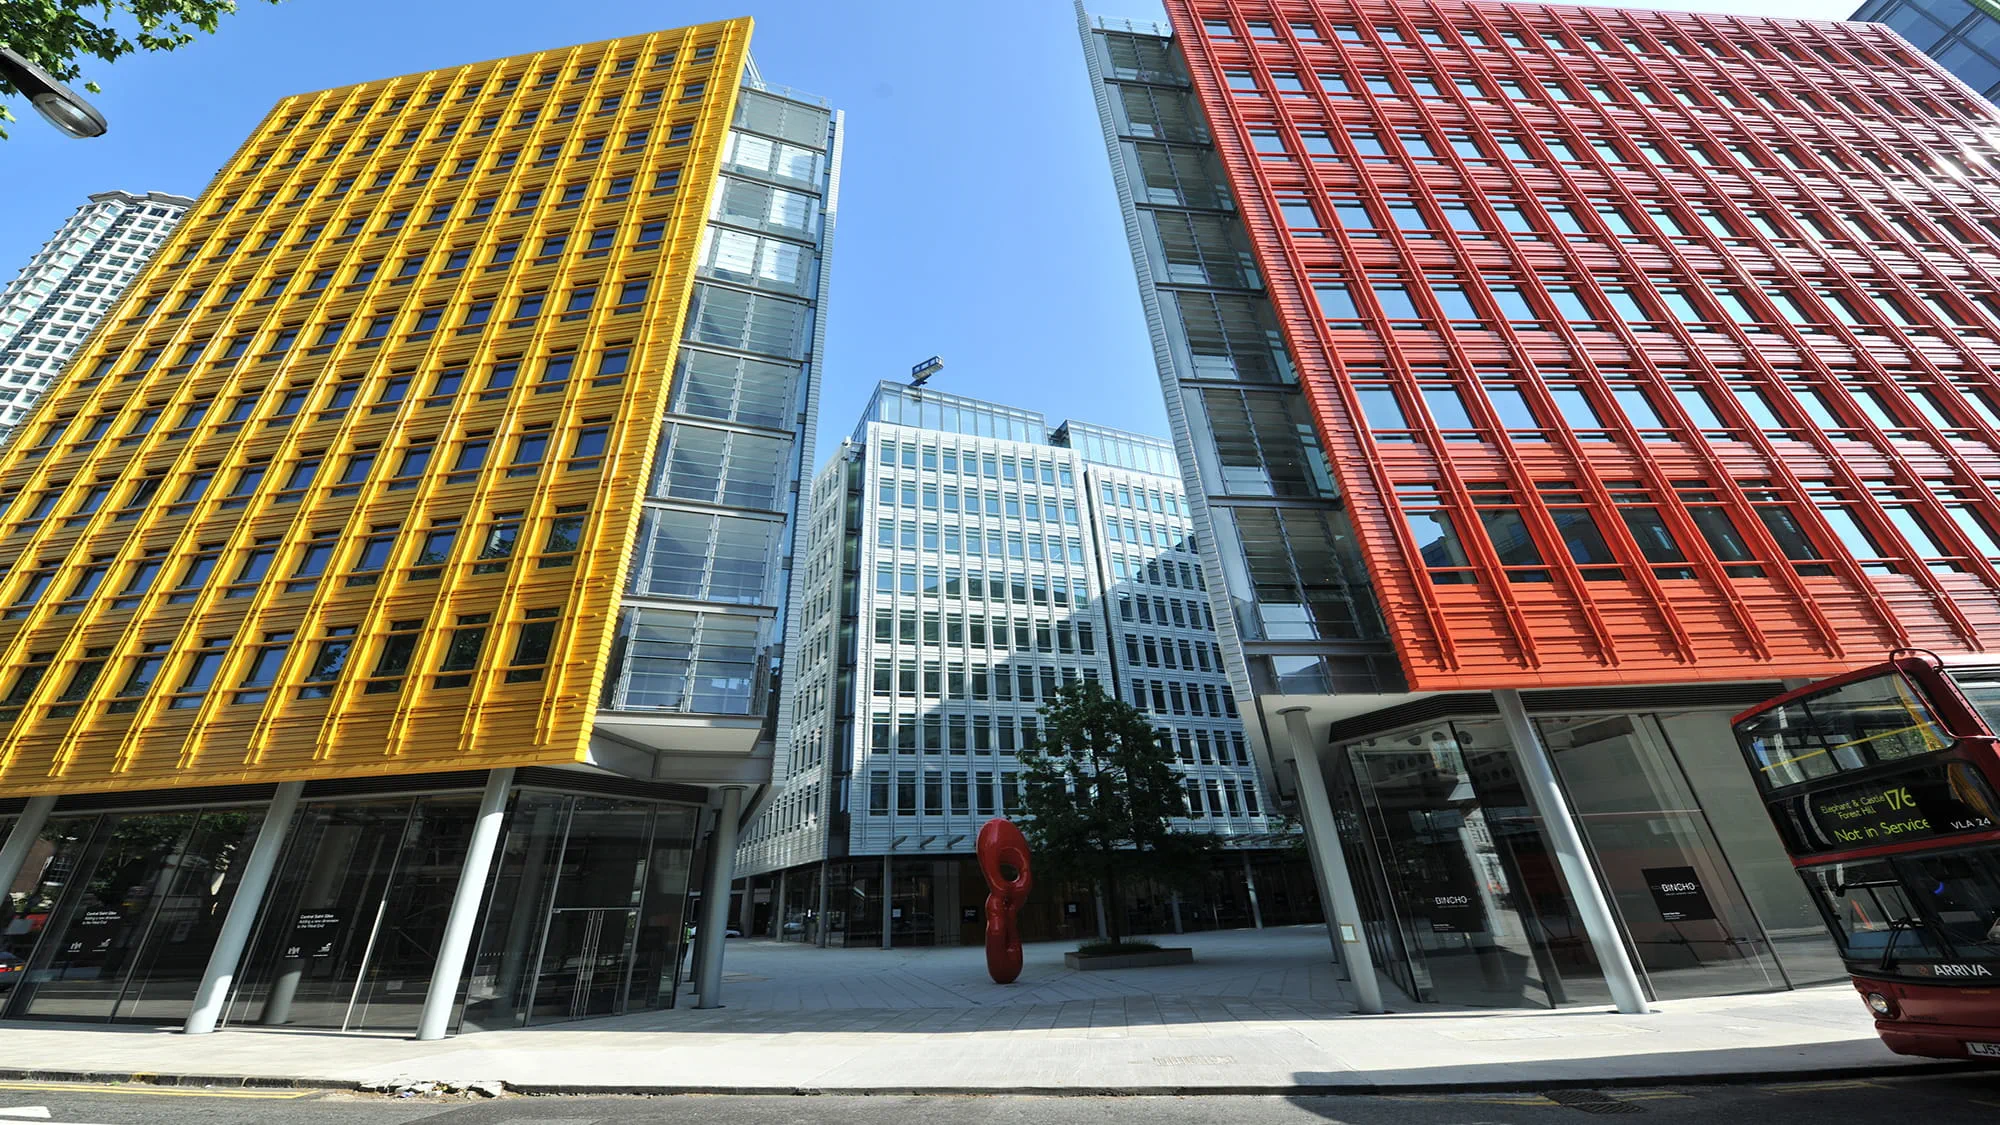 Central St Giles is one of the first city centre projects with a site-wide biomass heating system